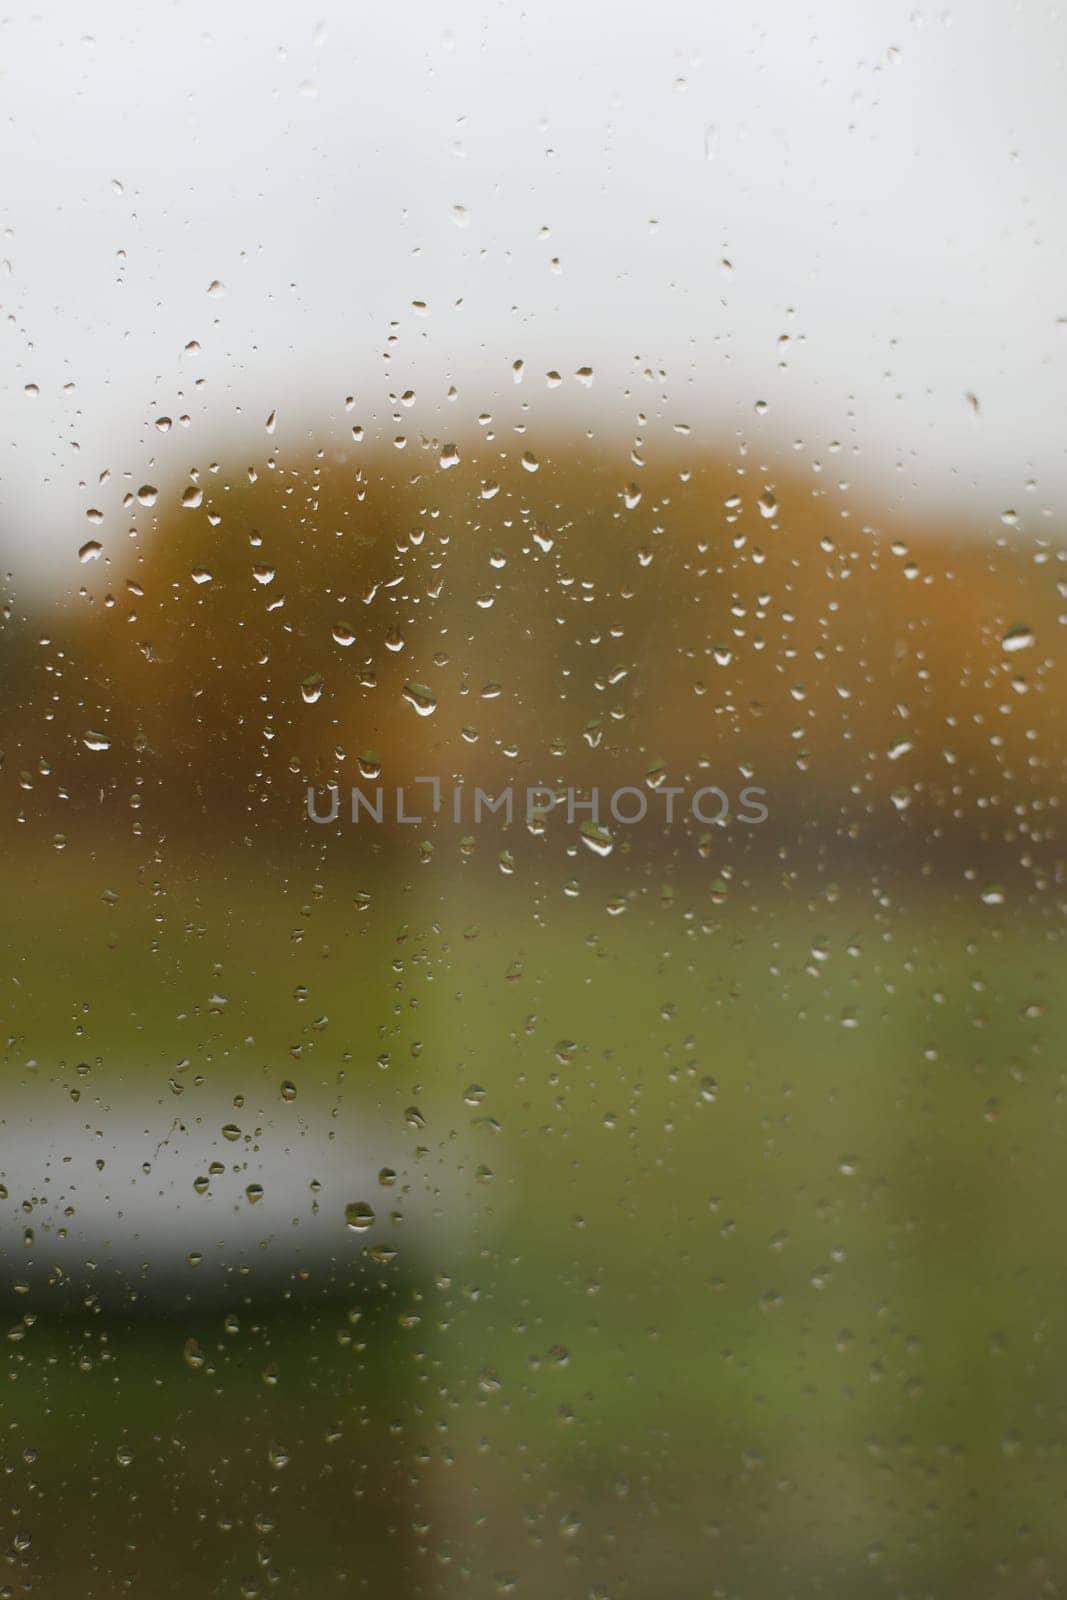 Water drops on glass texture abstract autumn nature background,Selective focus. Natural pattern of rain drops on window glass surface